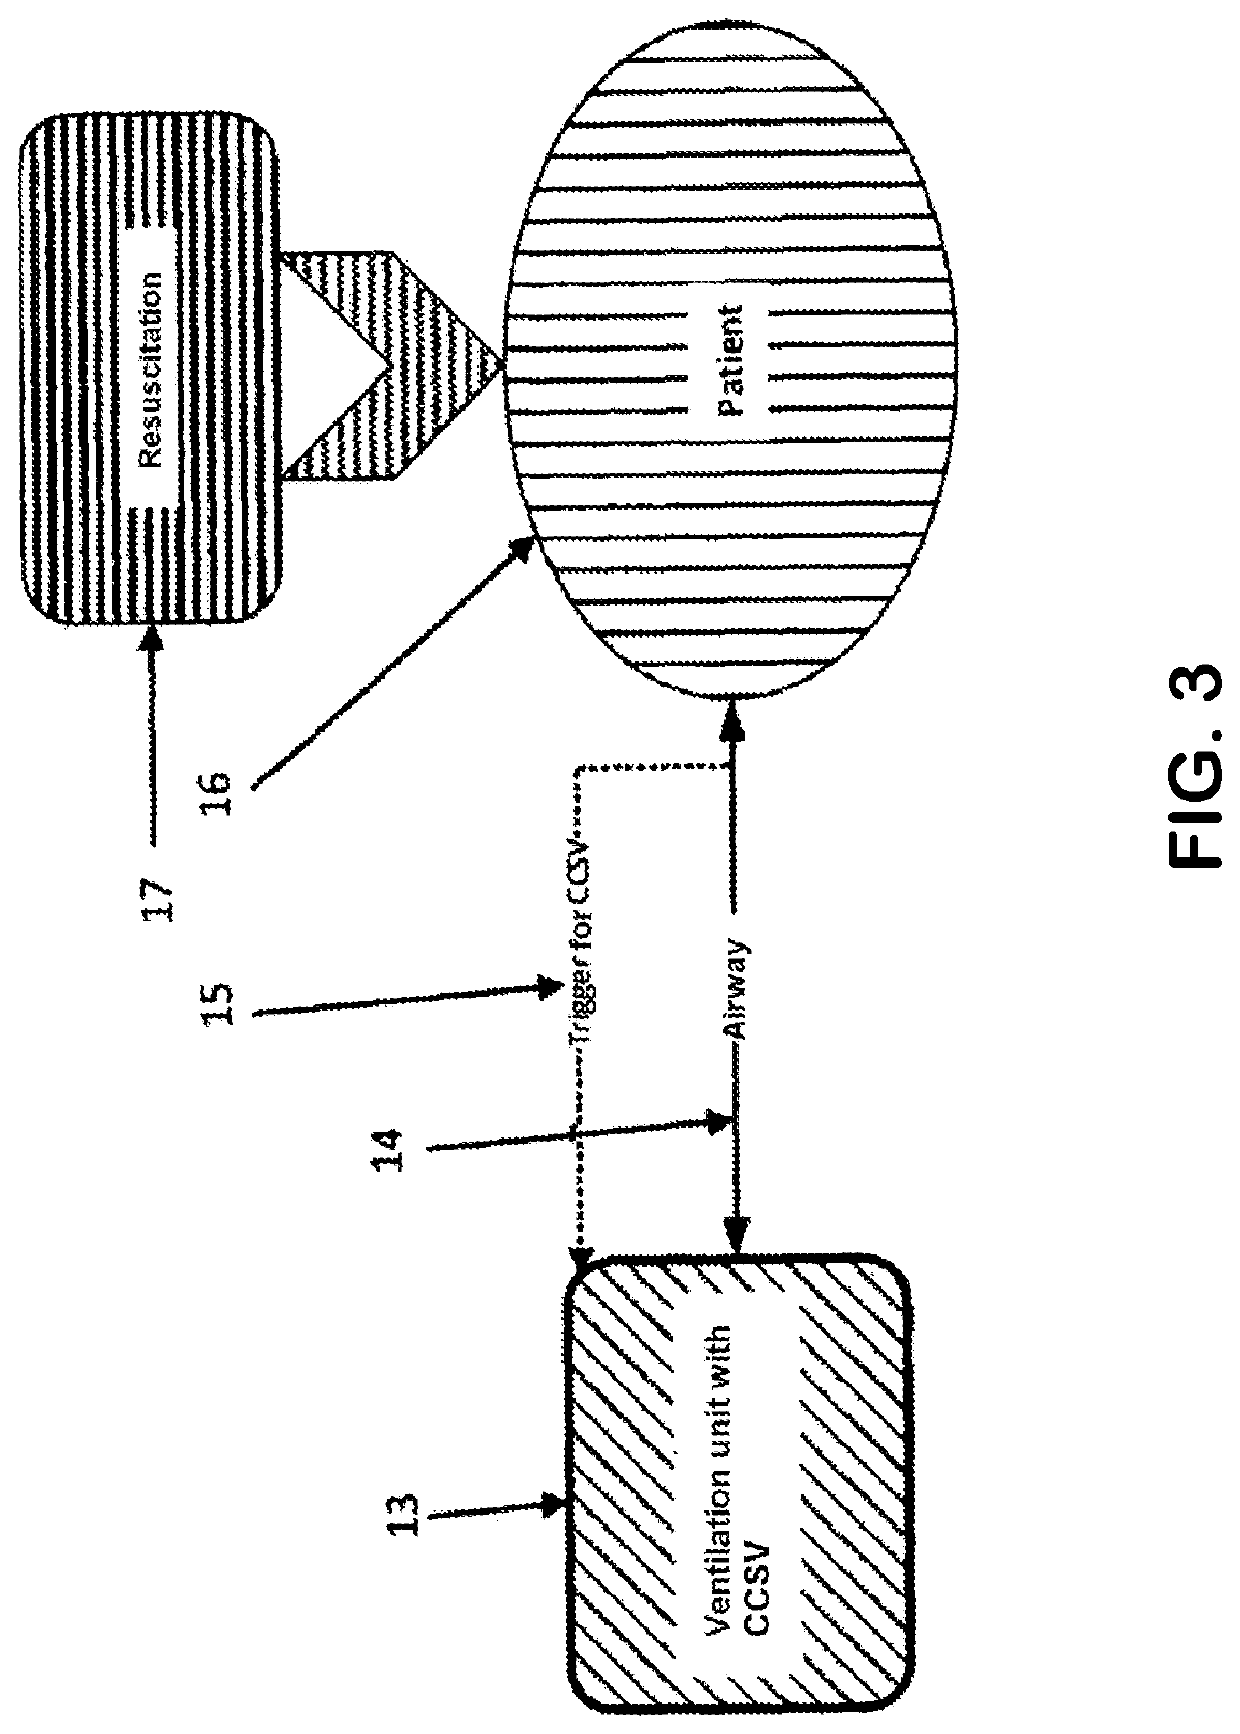 Display for outputting information contents of medical devices